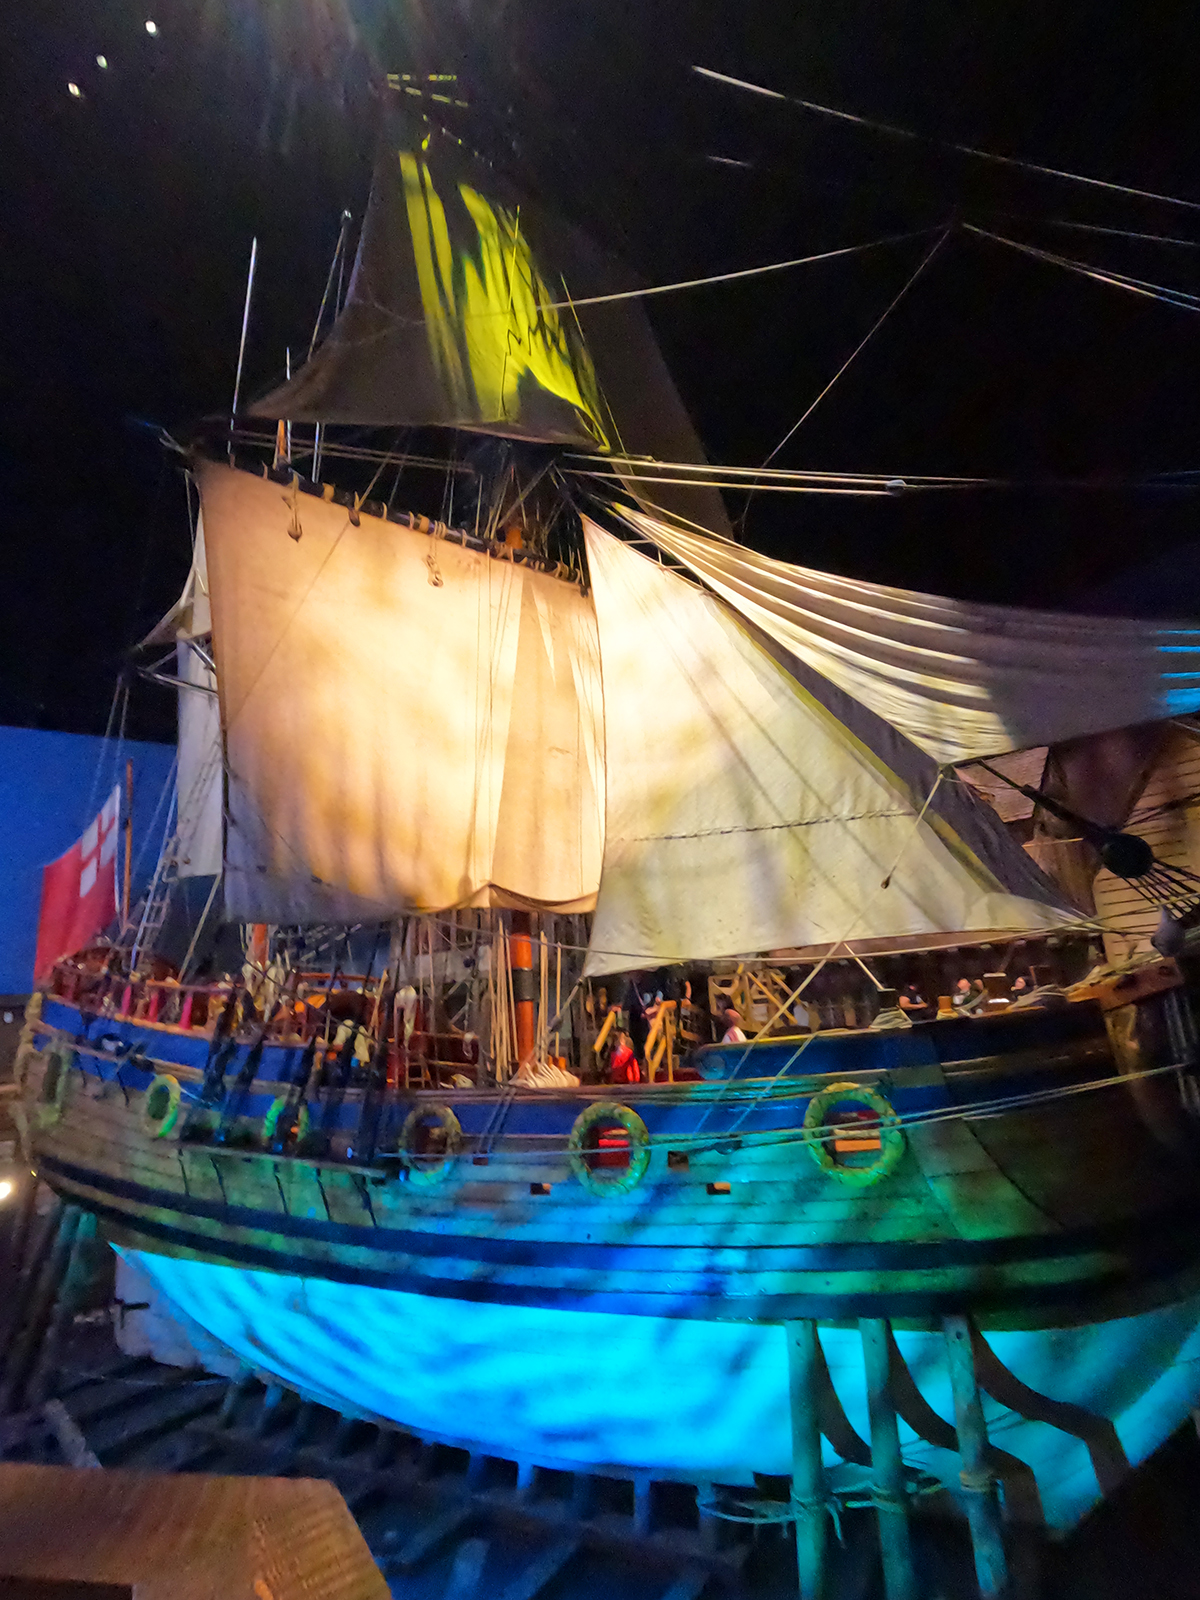 things to do in winnipeg view of pirate ship lit up inside manitoba museum